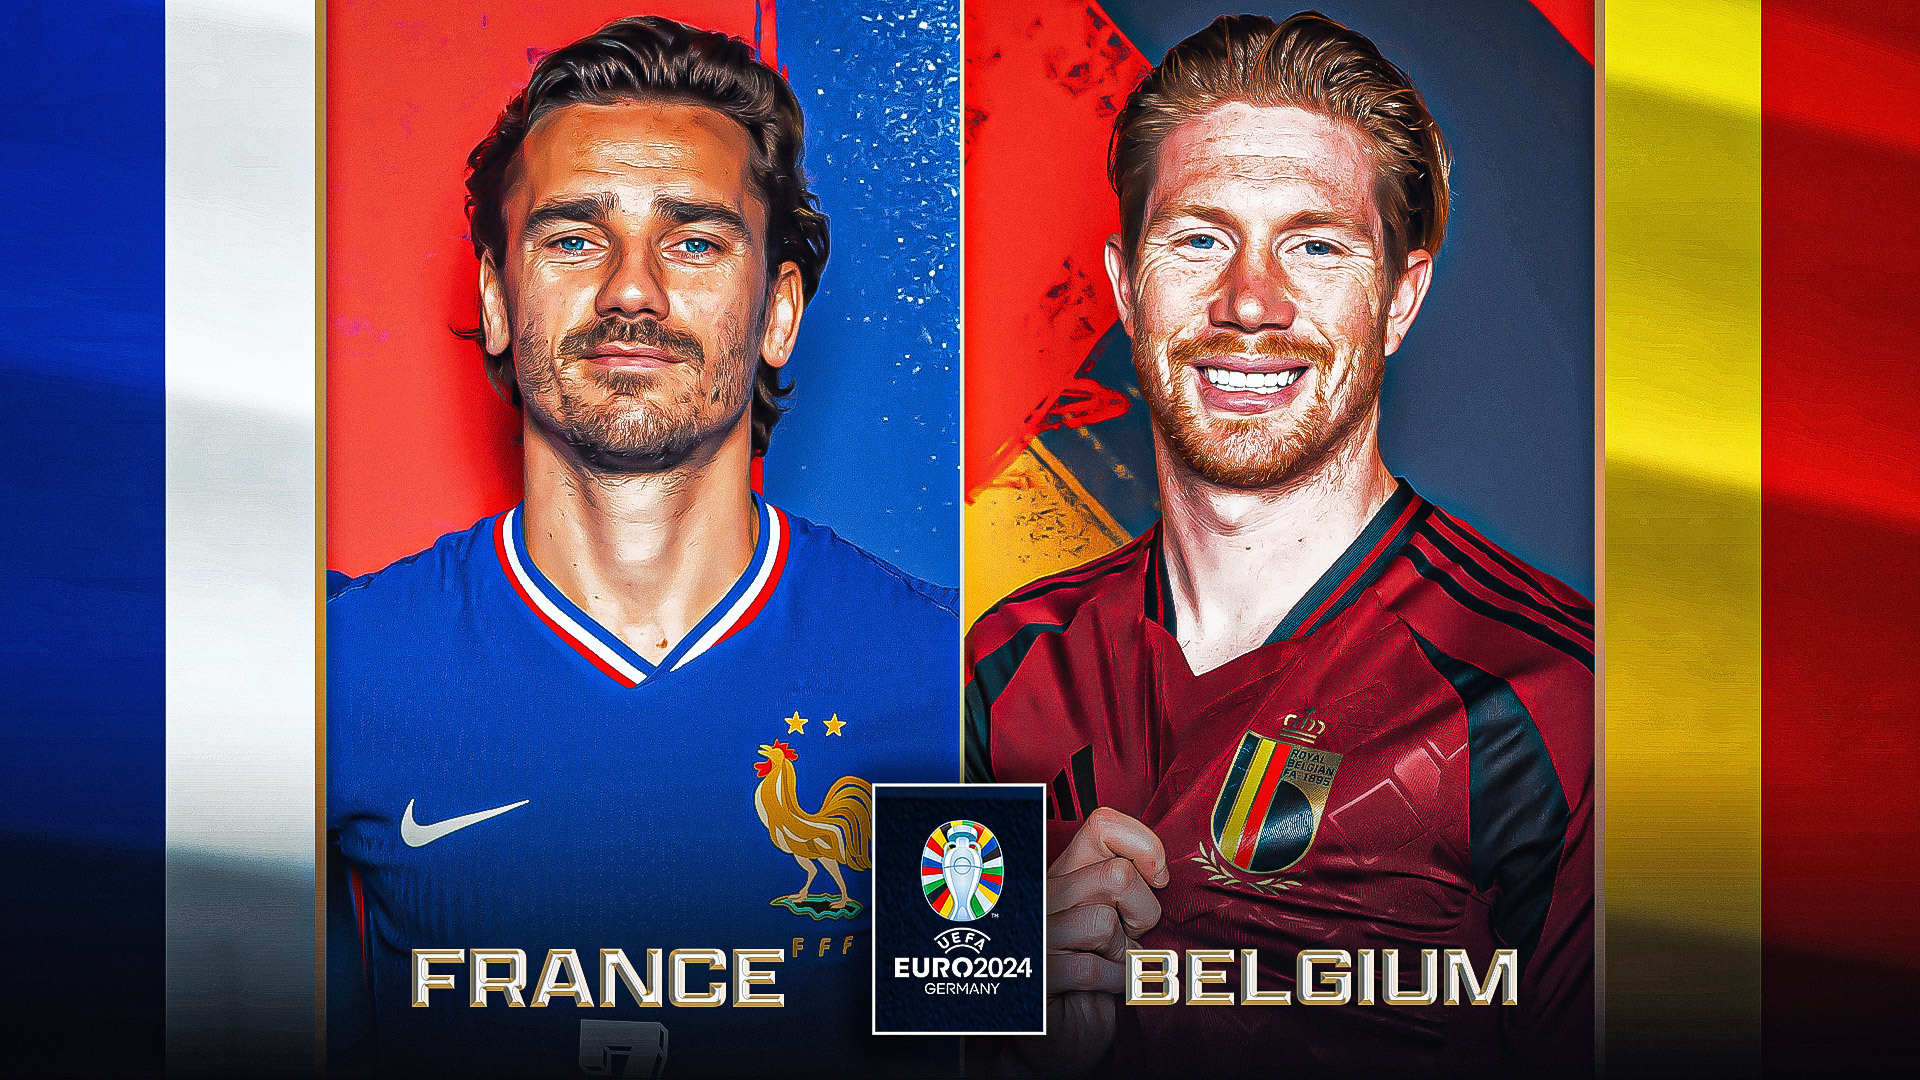 France vs. Belgium highlights: France advances after late own goal by Belgium